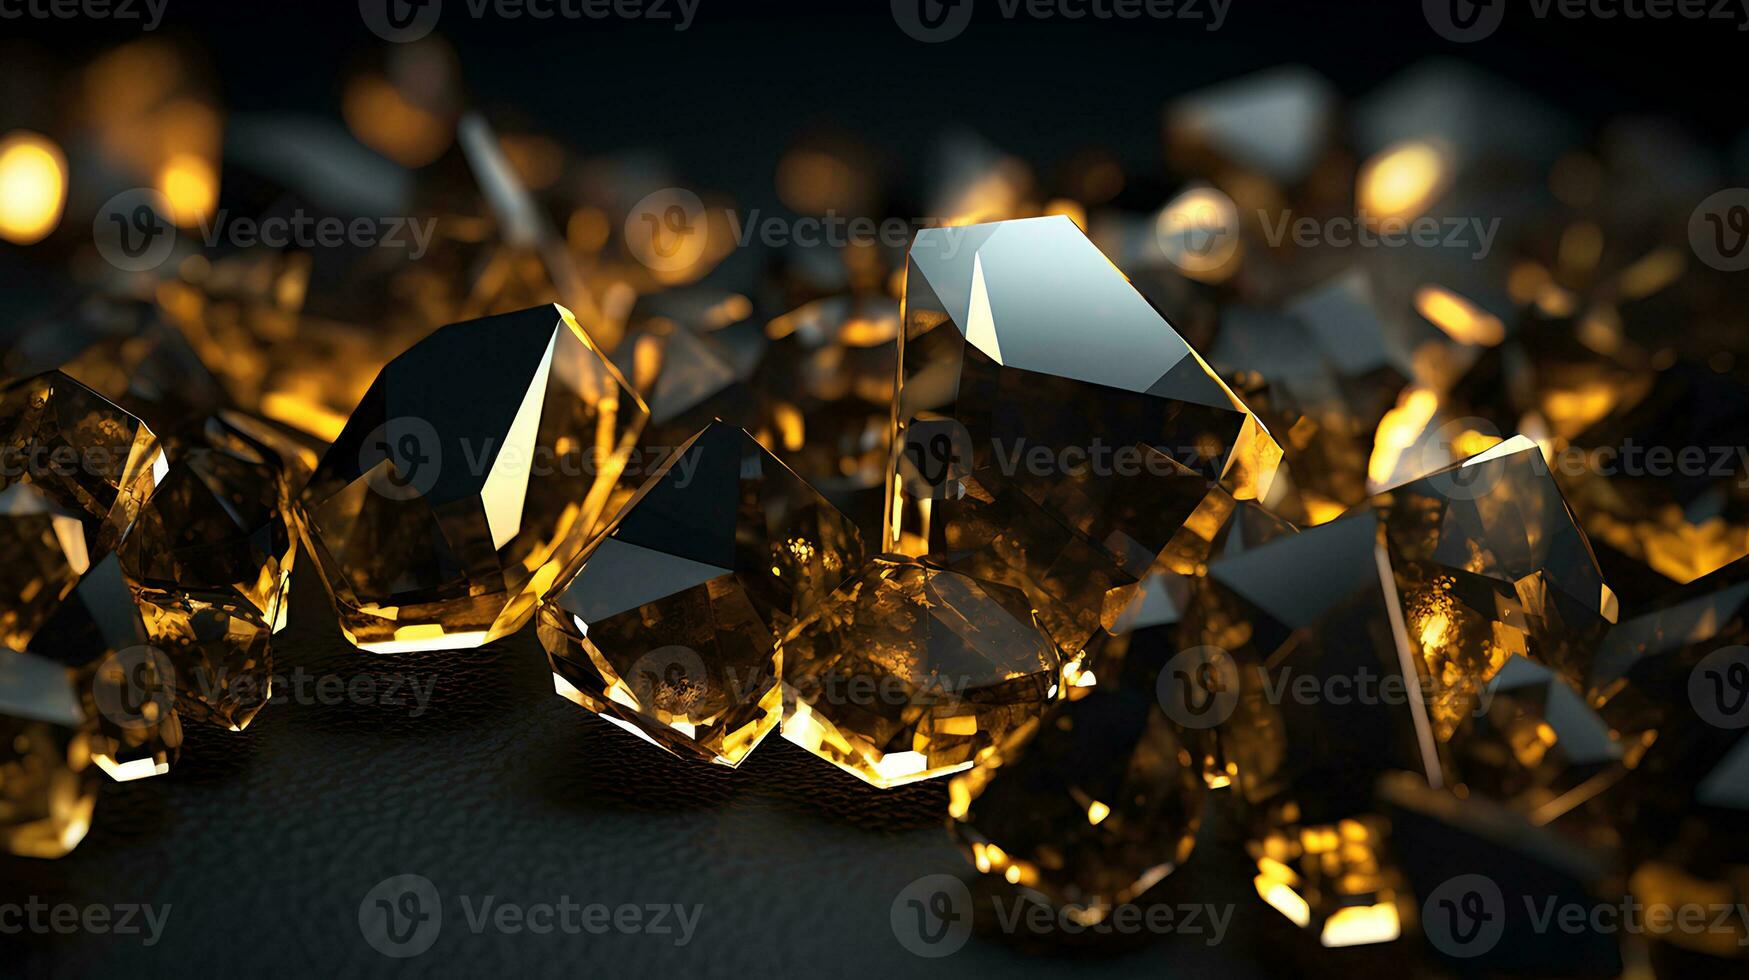 Beautifull golden and black abstract cristaled 3d background image photo